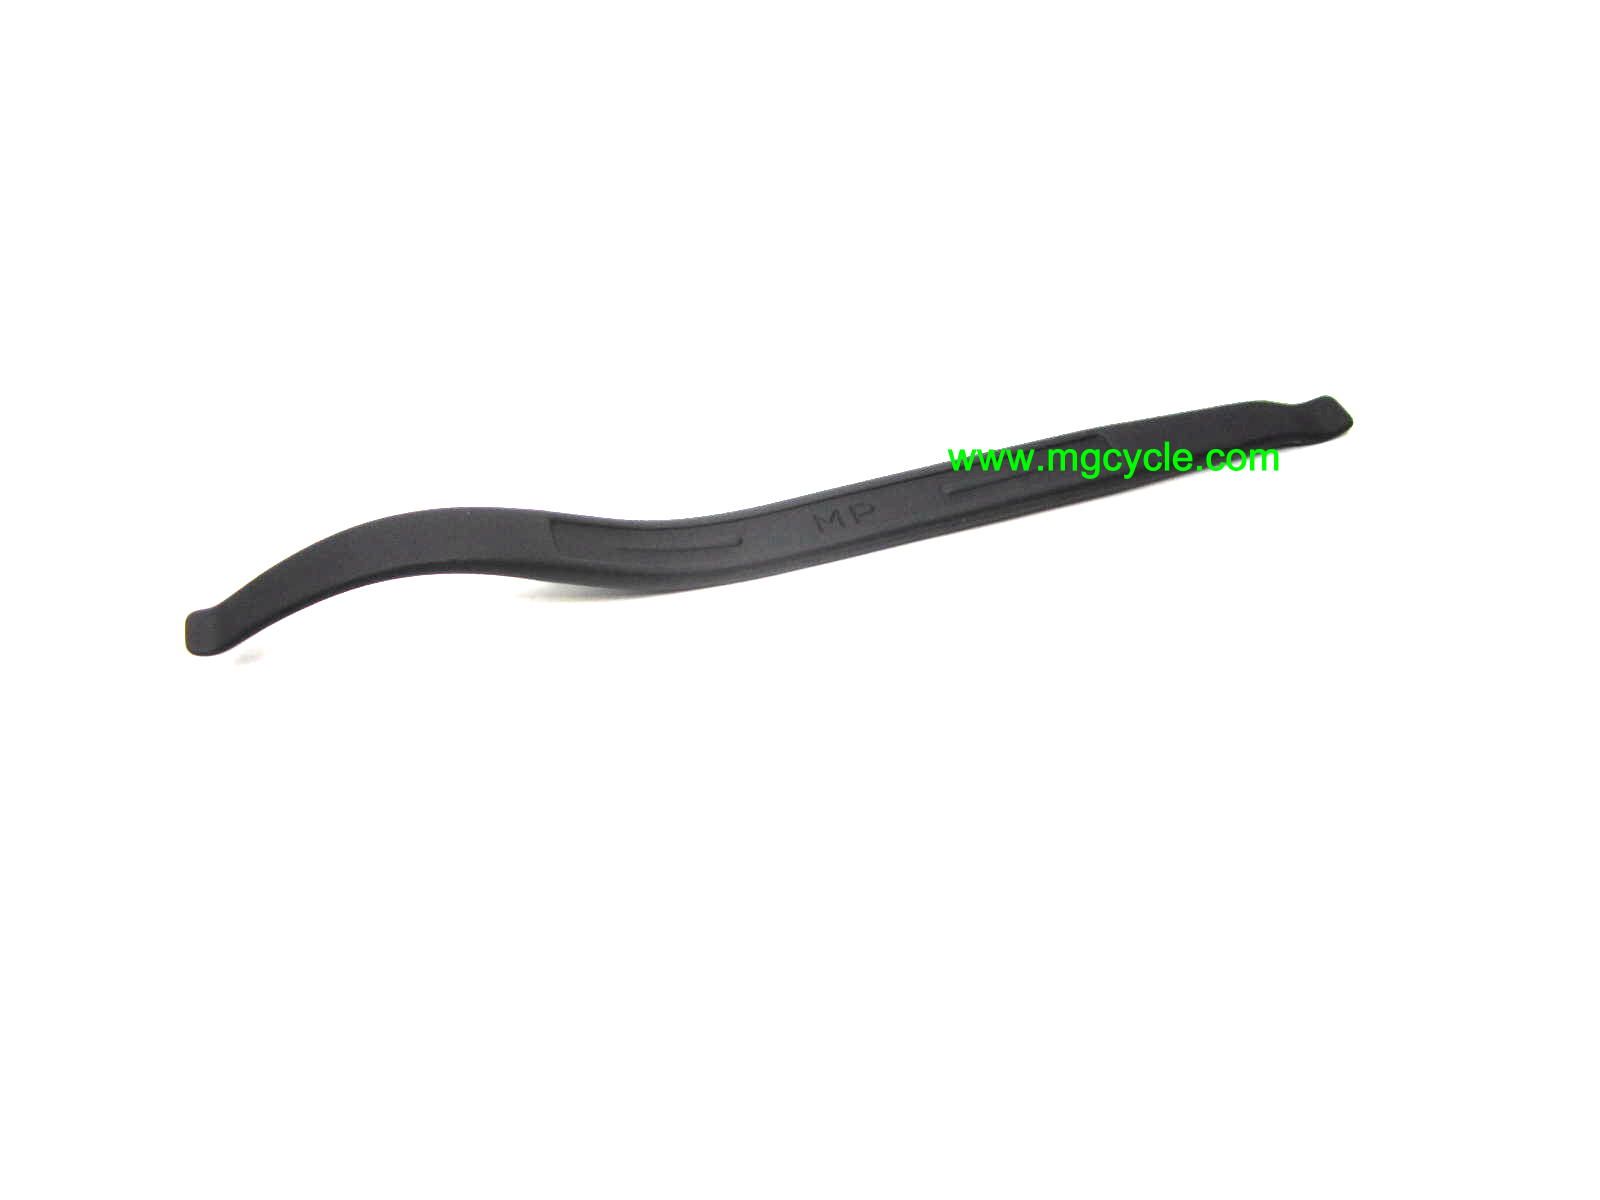 Super tire iron, curved and 15 inches long